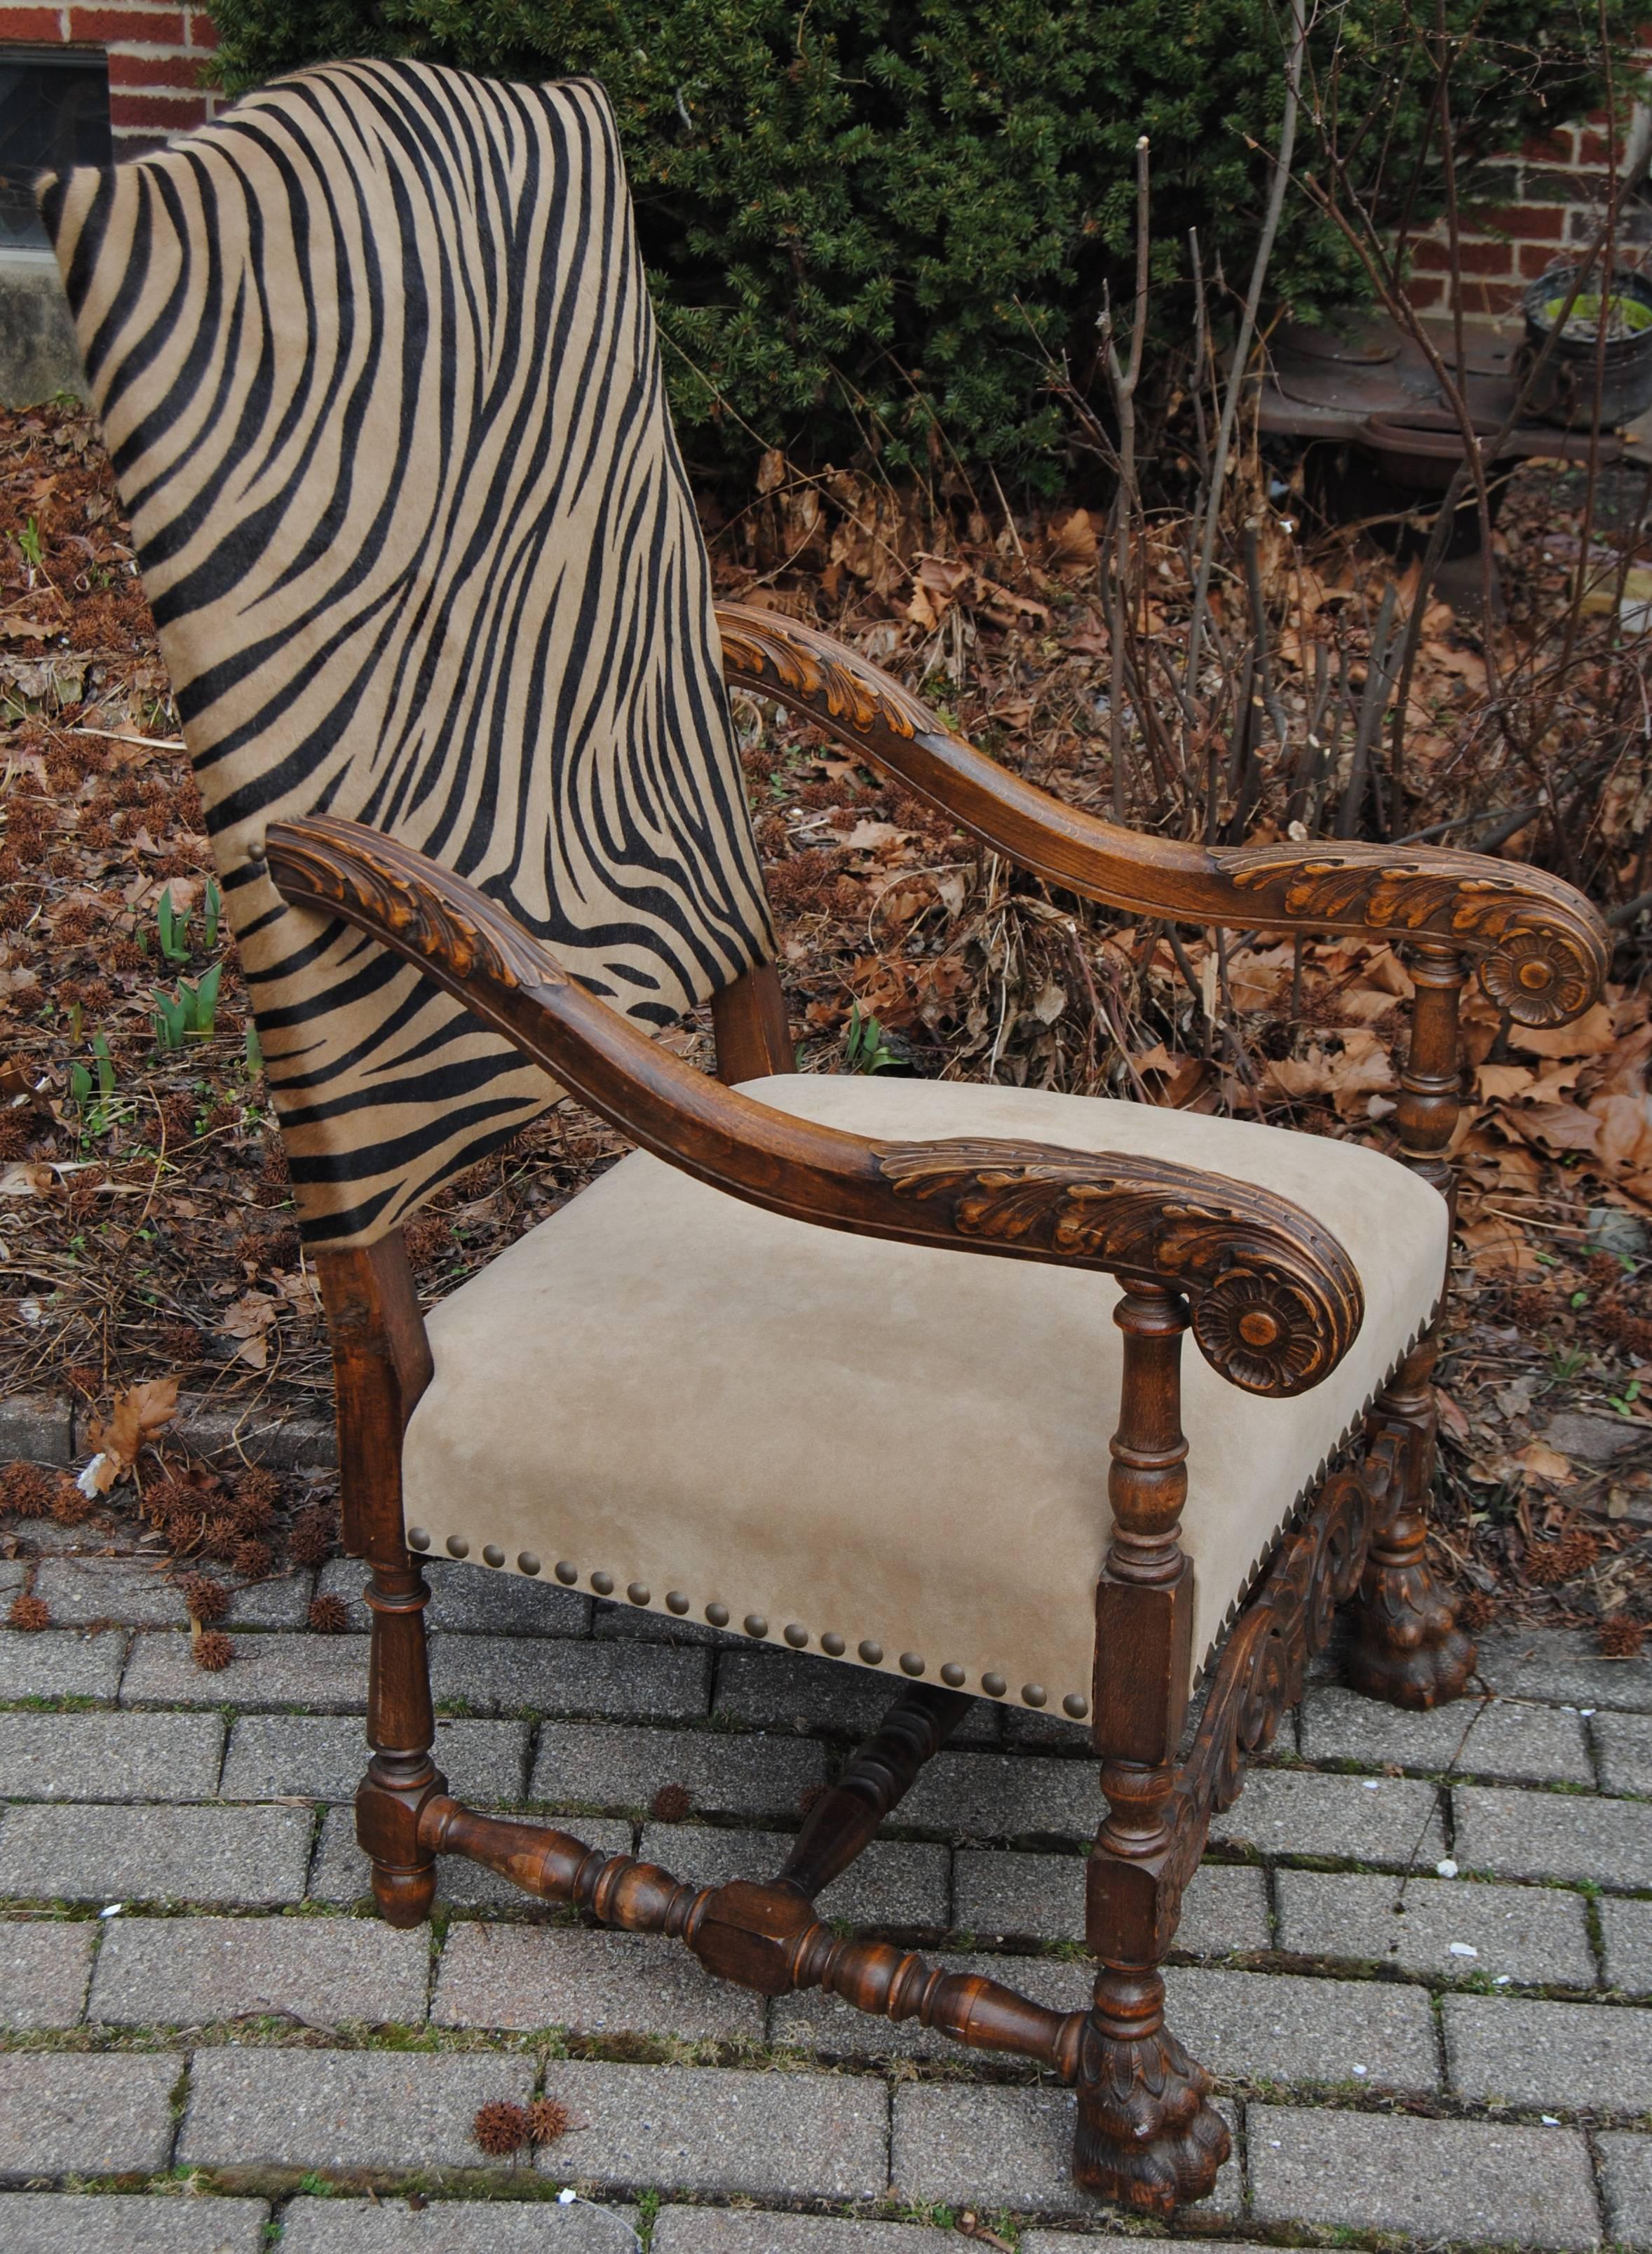 Antique European hand-carved armchair newly upholstered in Edelman faux zebra cowhide with Edelman solid suede leather seat. Wood has original finish in good condition.